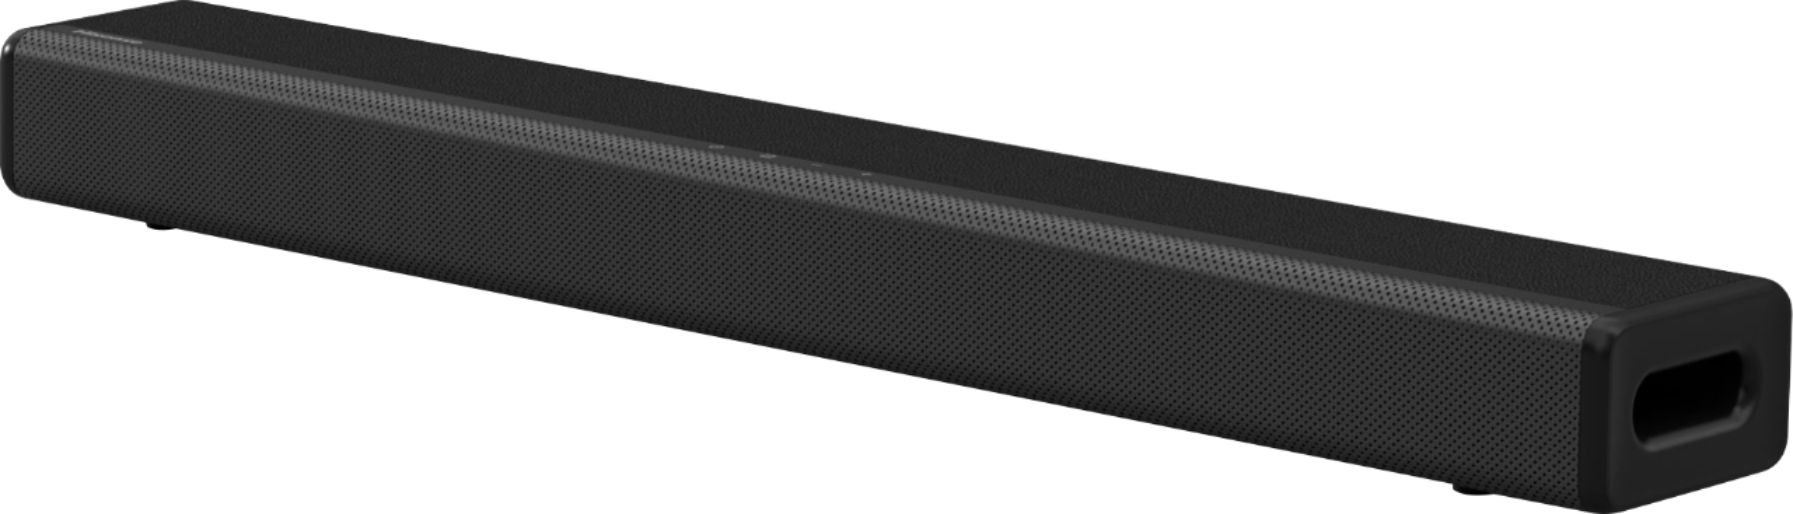 Angle View: Hisense - 2.1-Channel Soundbar with Built-in Subwoofer - black